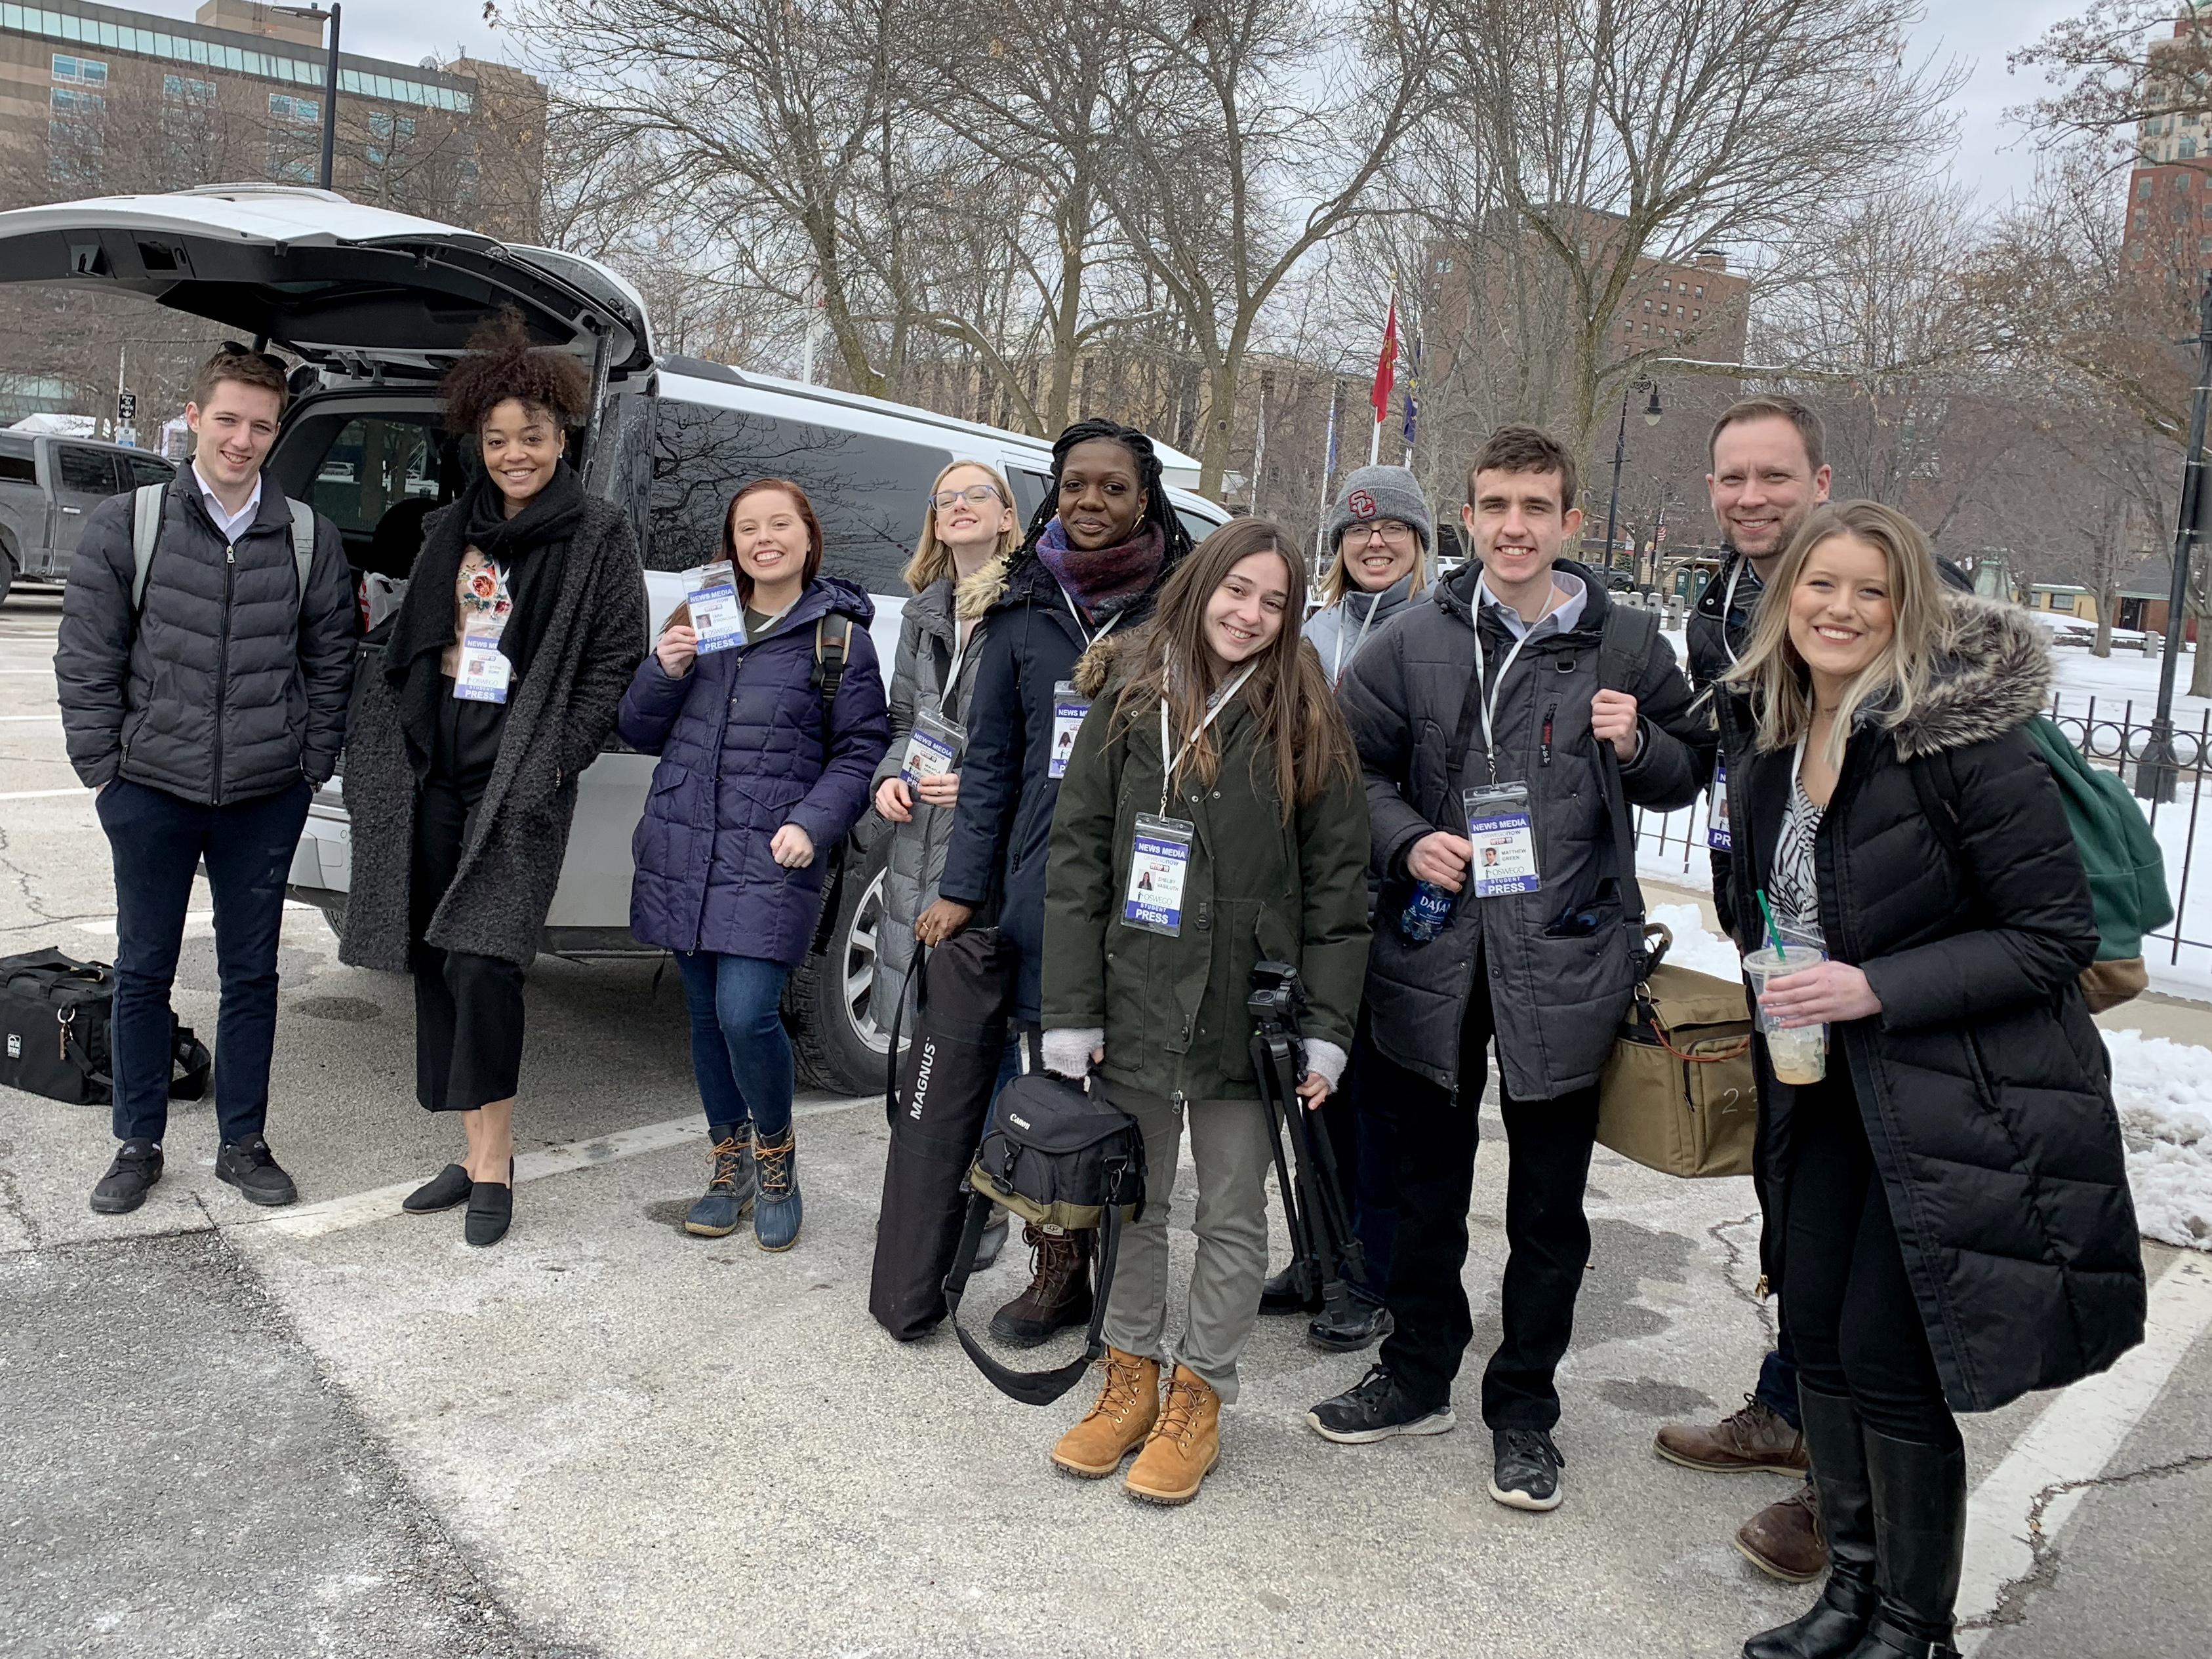 Broadcasting students traveled to New Hampshire to cover the presidential primary